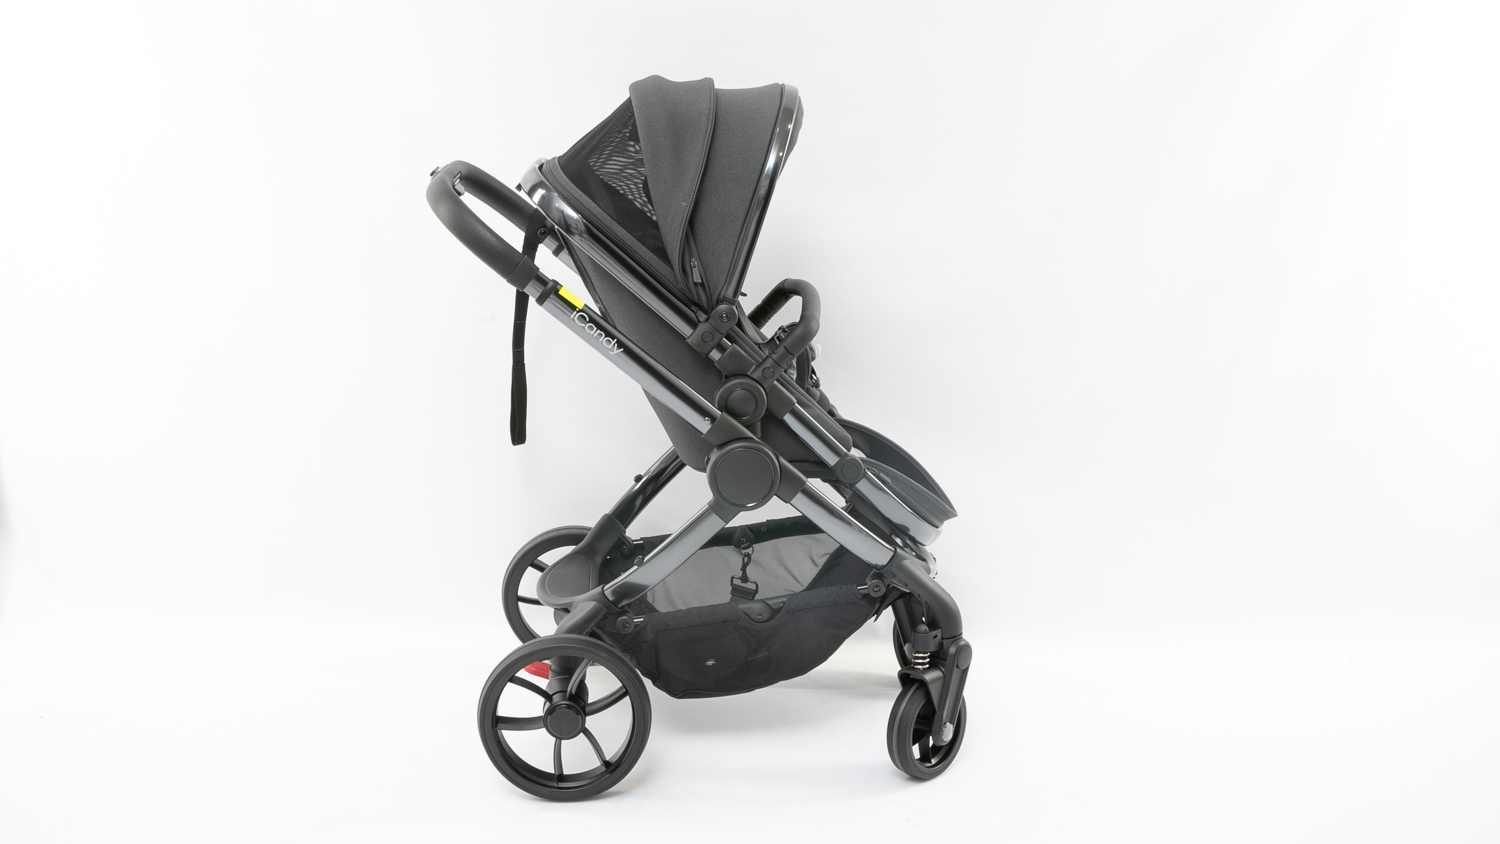 iCandy Peach 7 Review | Pram and stroller | CHOICE